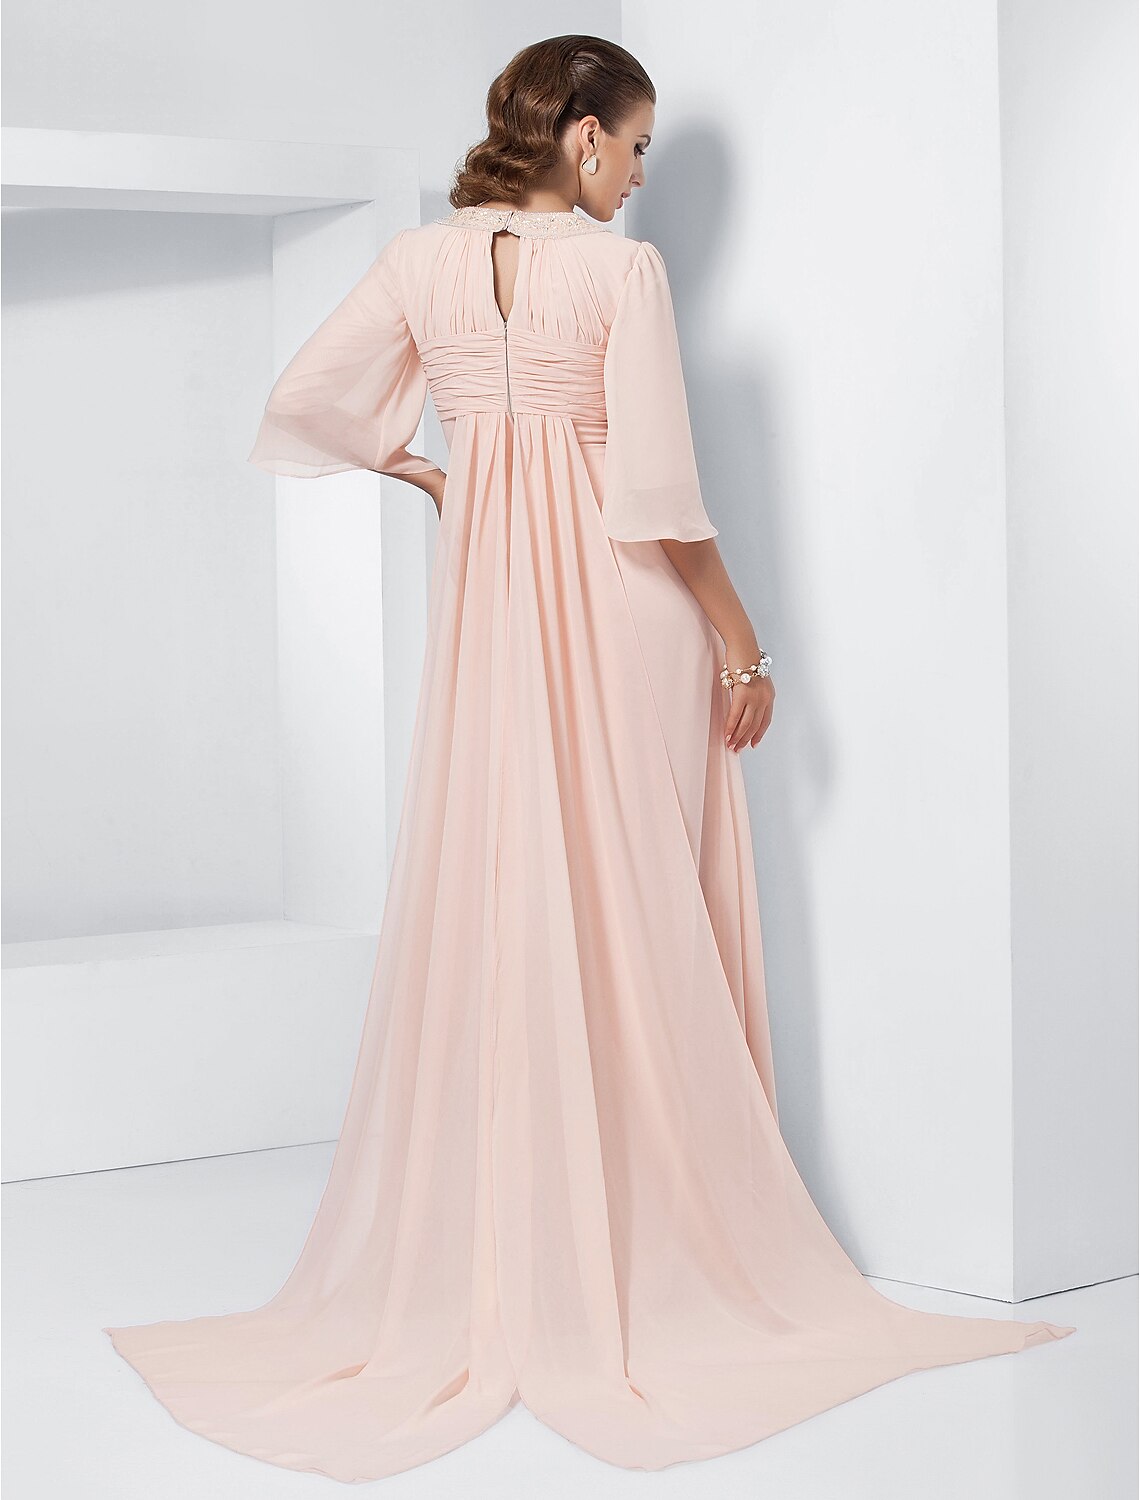 A-Line Special Occasion Dresses Elegant Dress Wedding Guest Sweep / Brush Train Half Sleeve Jewel Neck Chiffon with Beading Draping